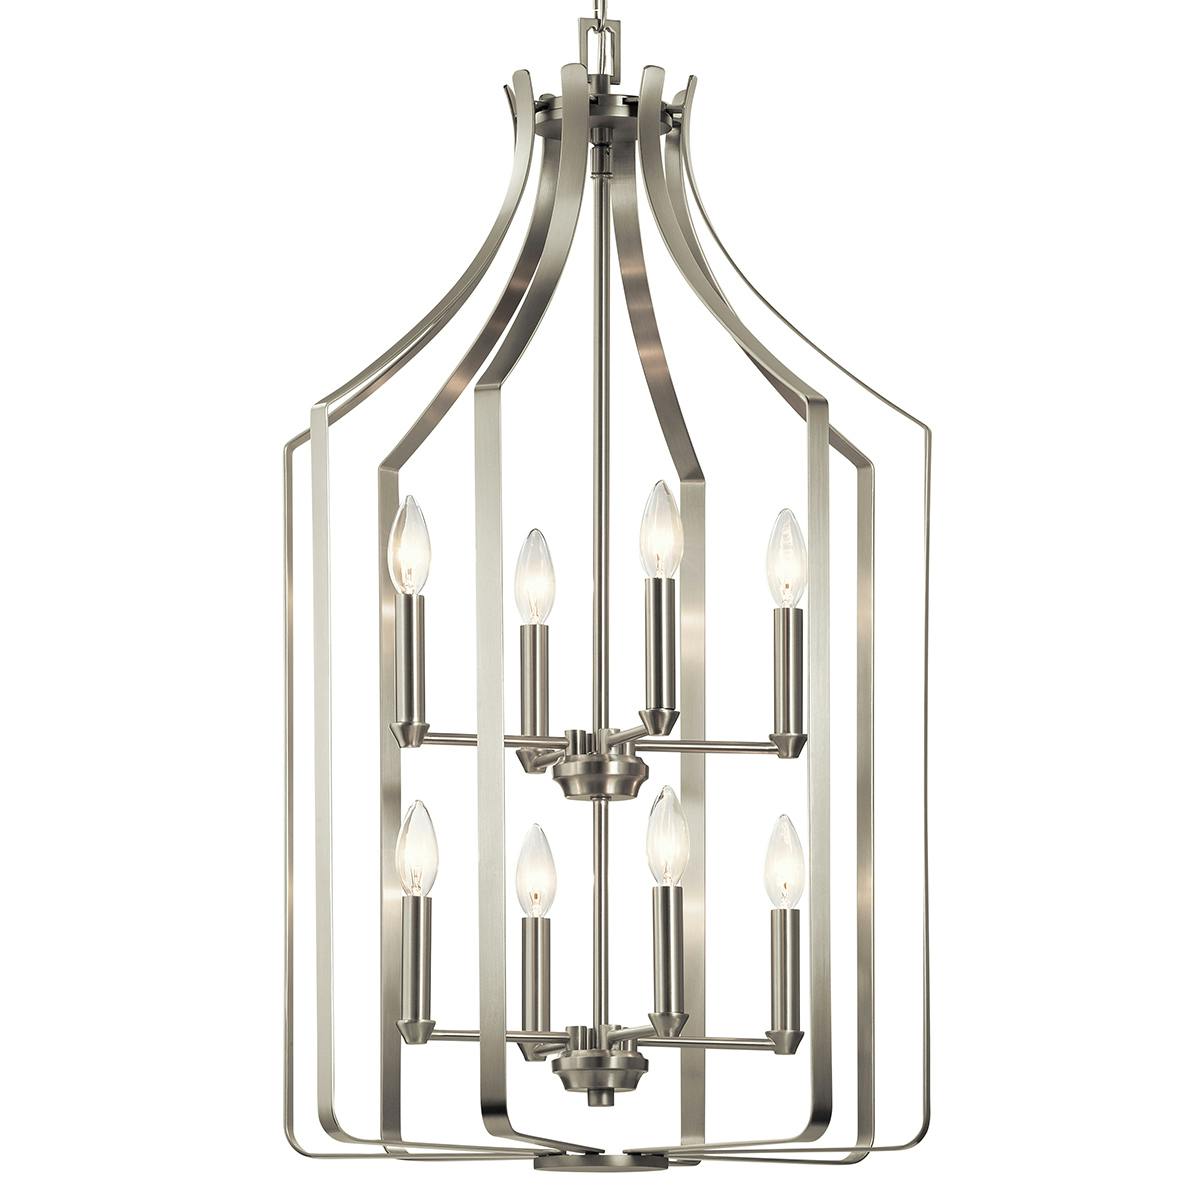 Close up view of the Morrigan 8 Light Foyer Chandelier Nickel on a white background